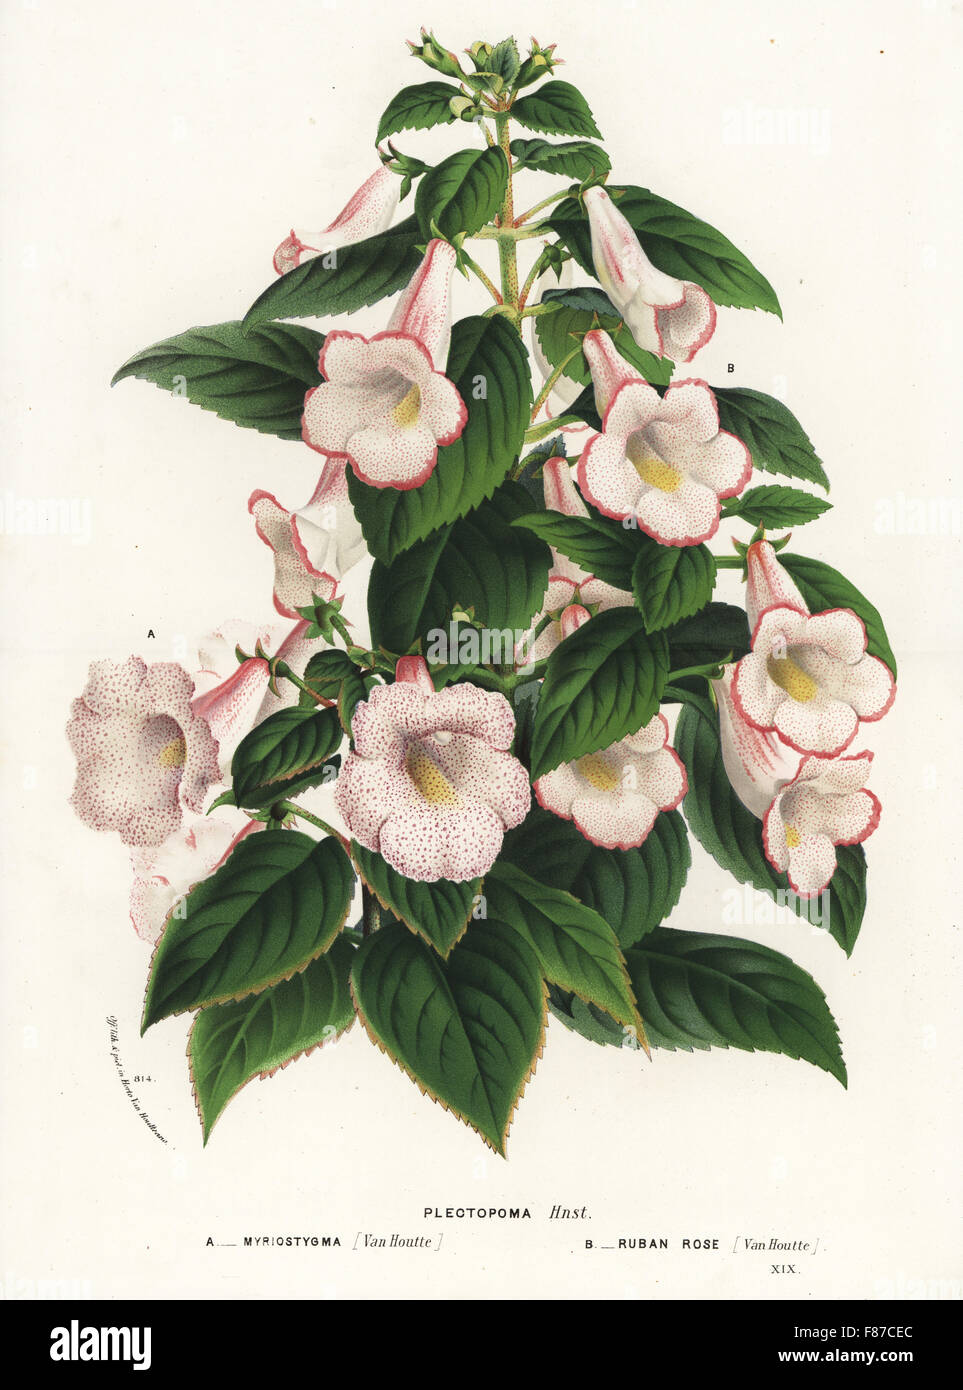 Plectopoma myriostygma and Plectopoma ruban rose. Handcoloured lithograph from Louis van Houtte and Charles Lemaire's Flowers of the Gardens and Hothouses of Europe, Flore des Serres et des Jardins de l'Europe, Ghent, Belgium, 1870. Stock Photo